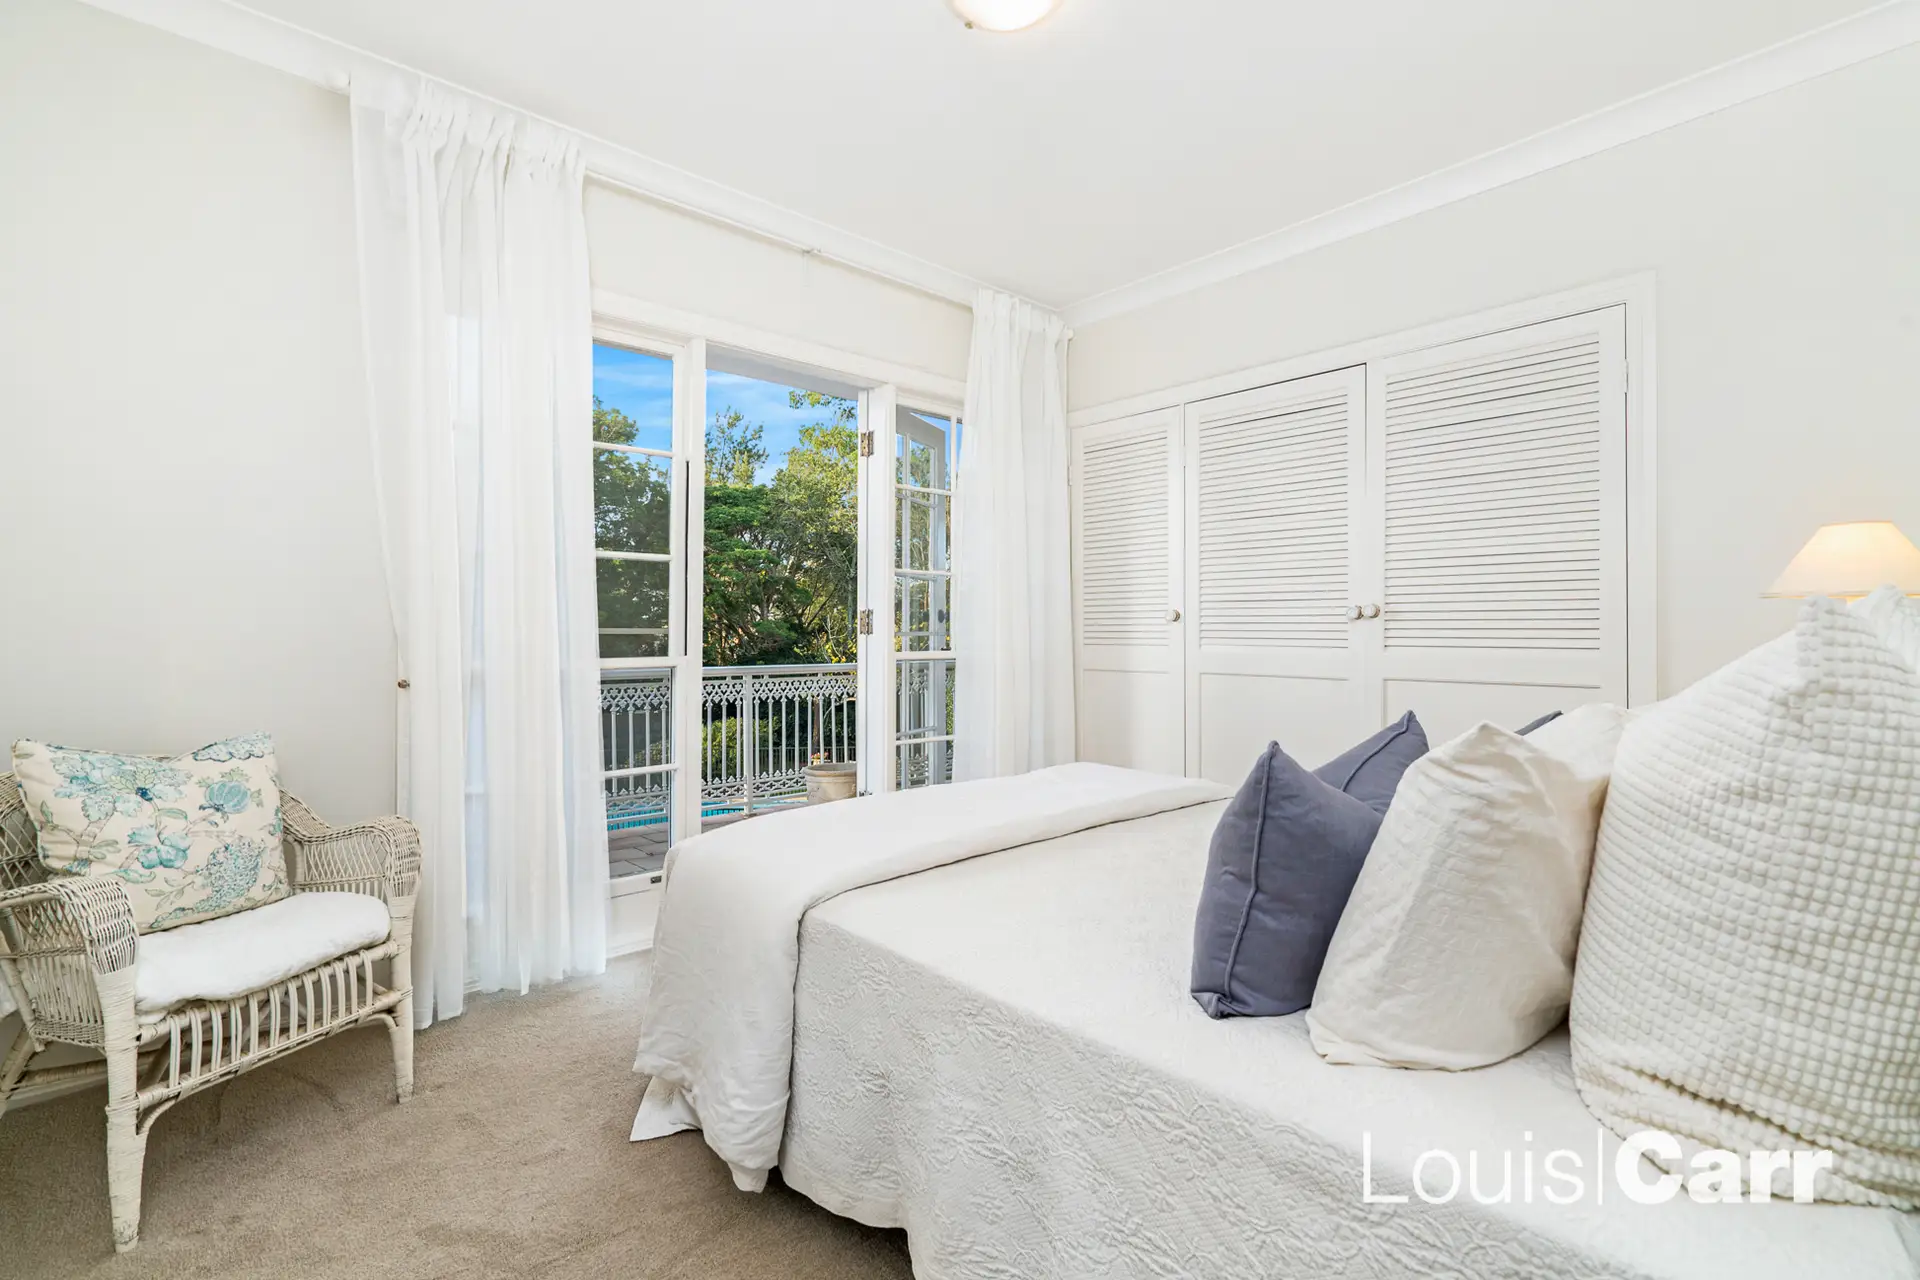 Photo #15: 2 Gumnut Road, Cherrybrook - Sold by Louis Carr Real Estate